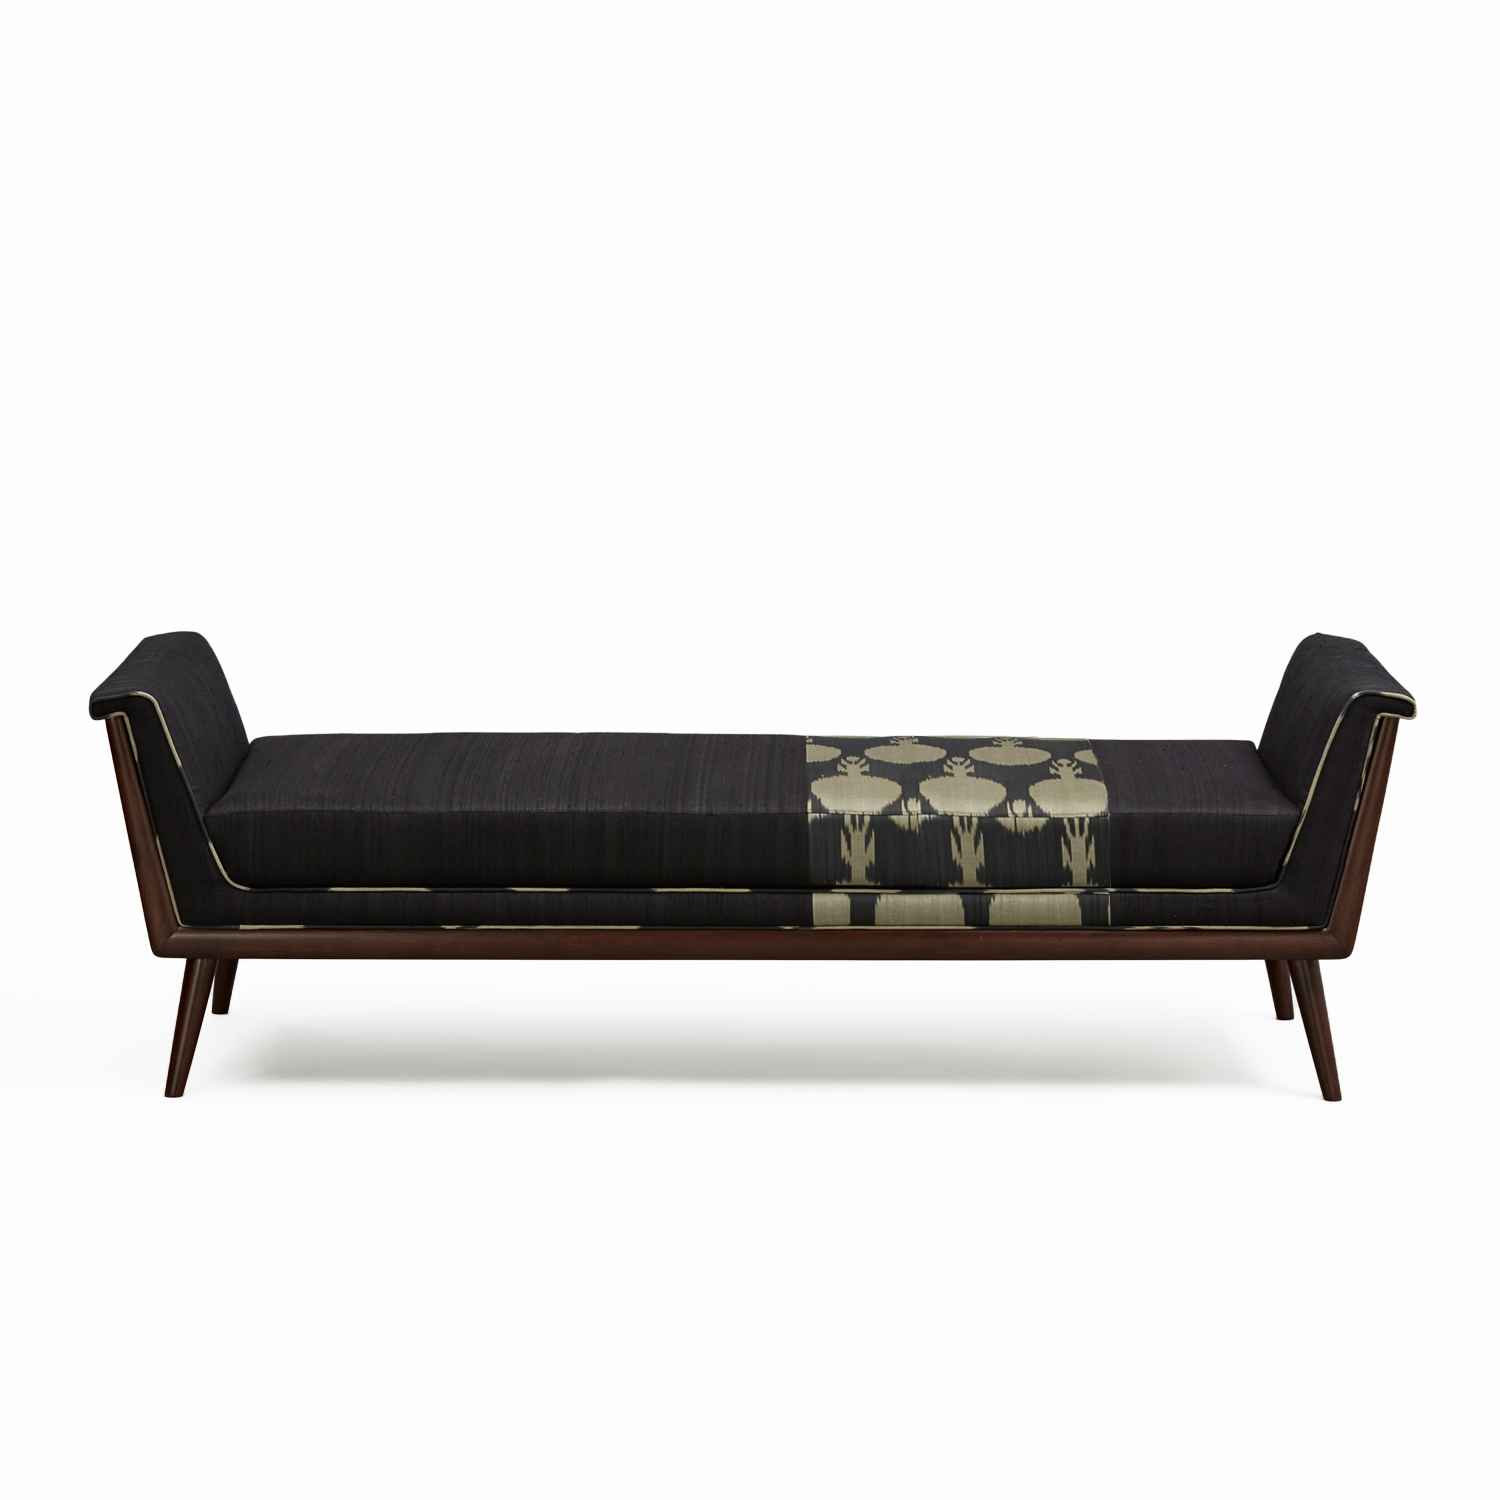 WALCON DAYBED